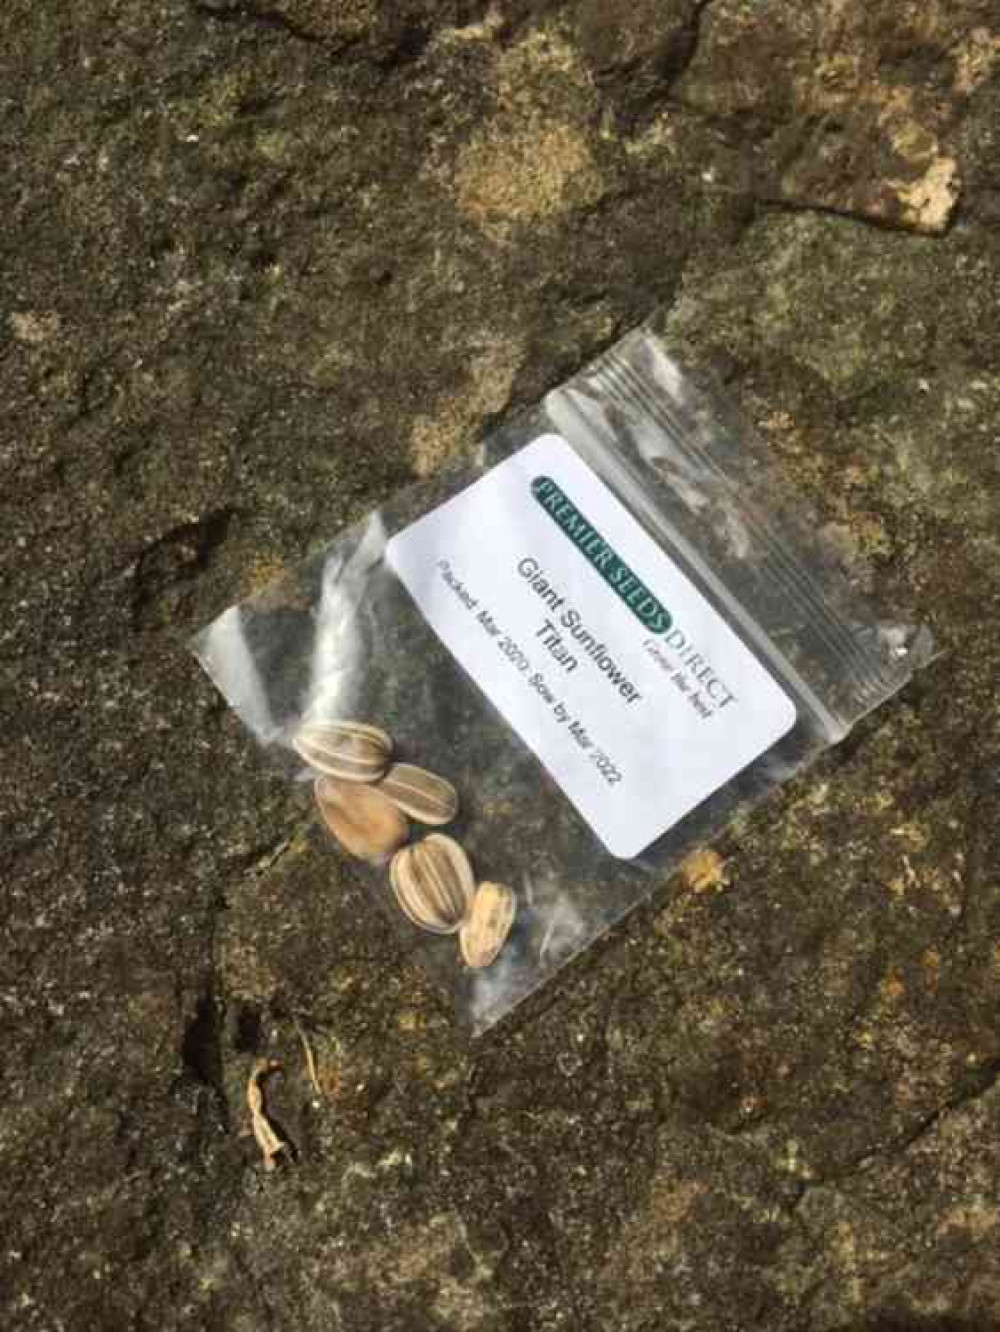 Left out in parks in Frome, a small packet of sunflower seeds with a sign asking people to join the growing competition